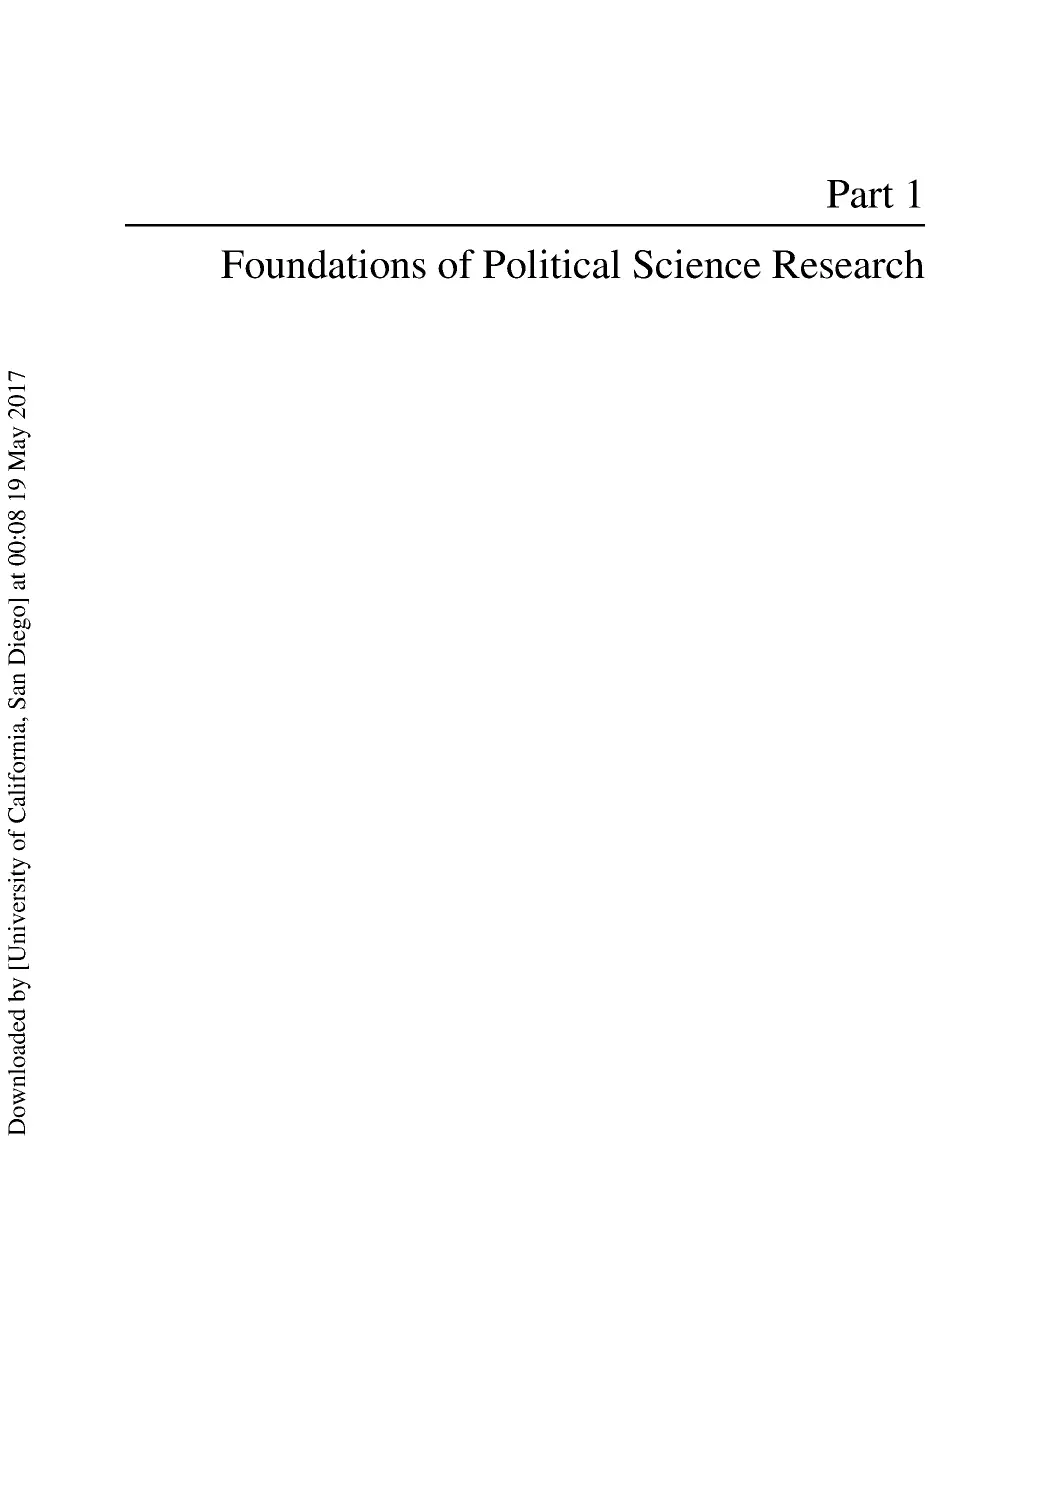 Part 1 Foundations of Political Science Research